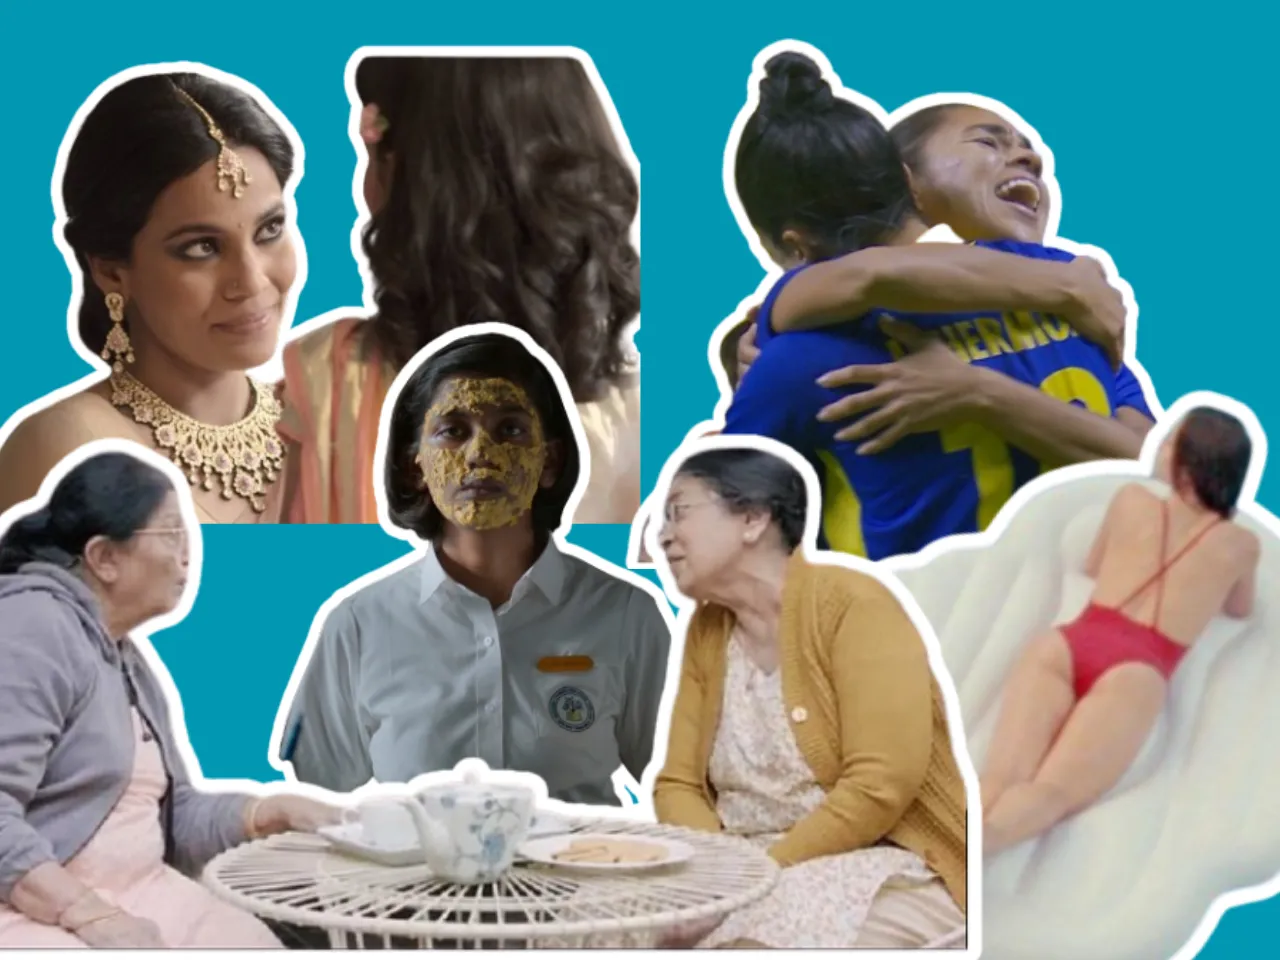 Experts share ad campaigns that empower women beyond stereotypes